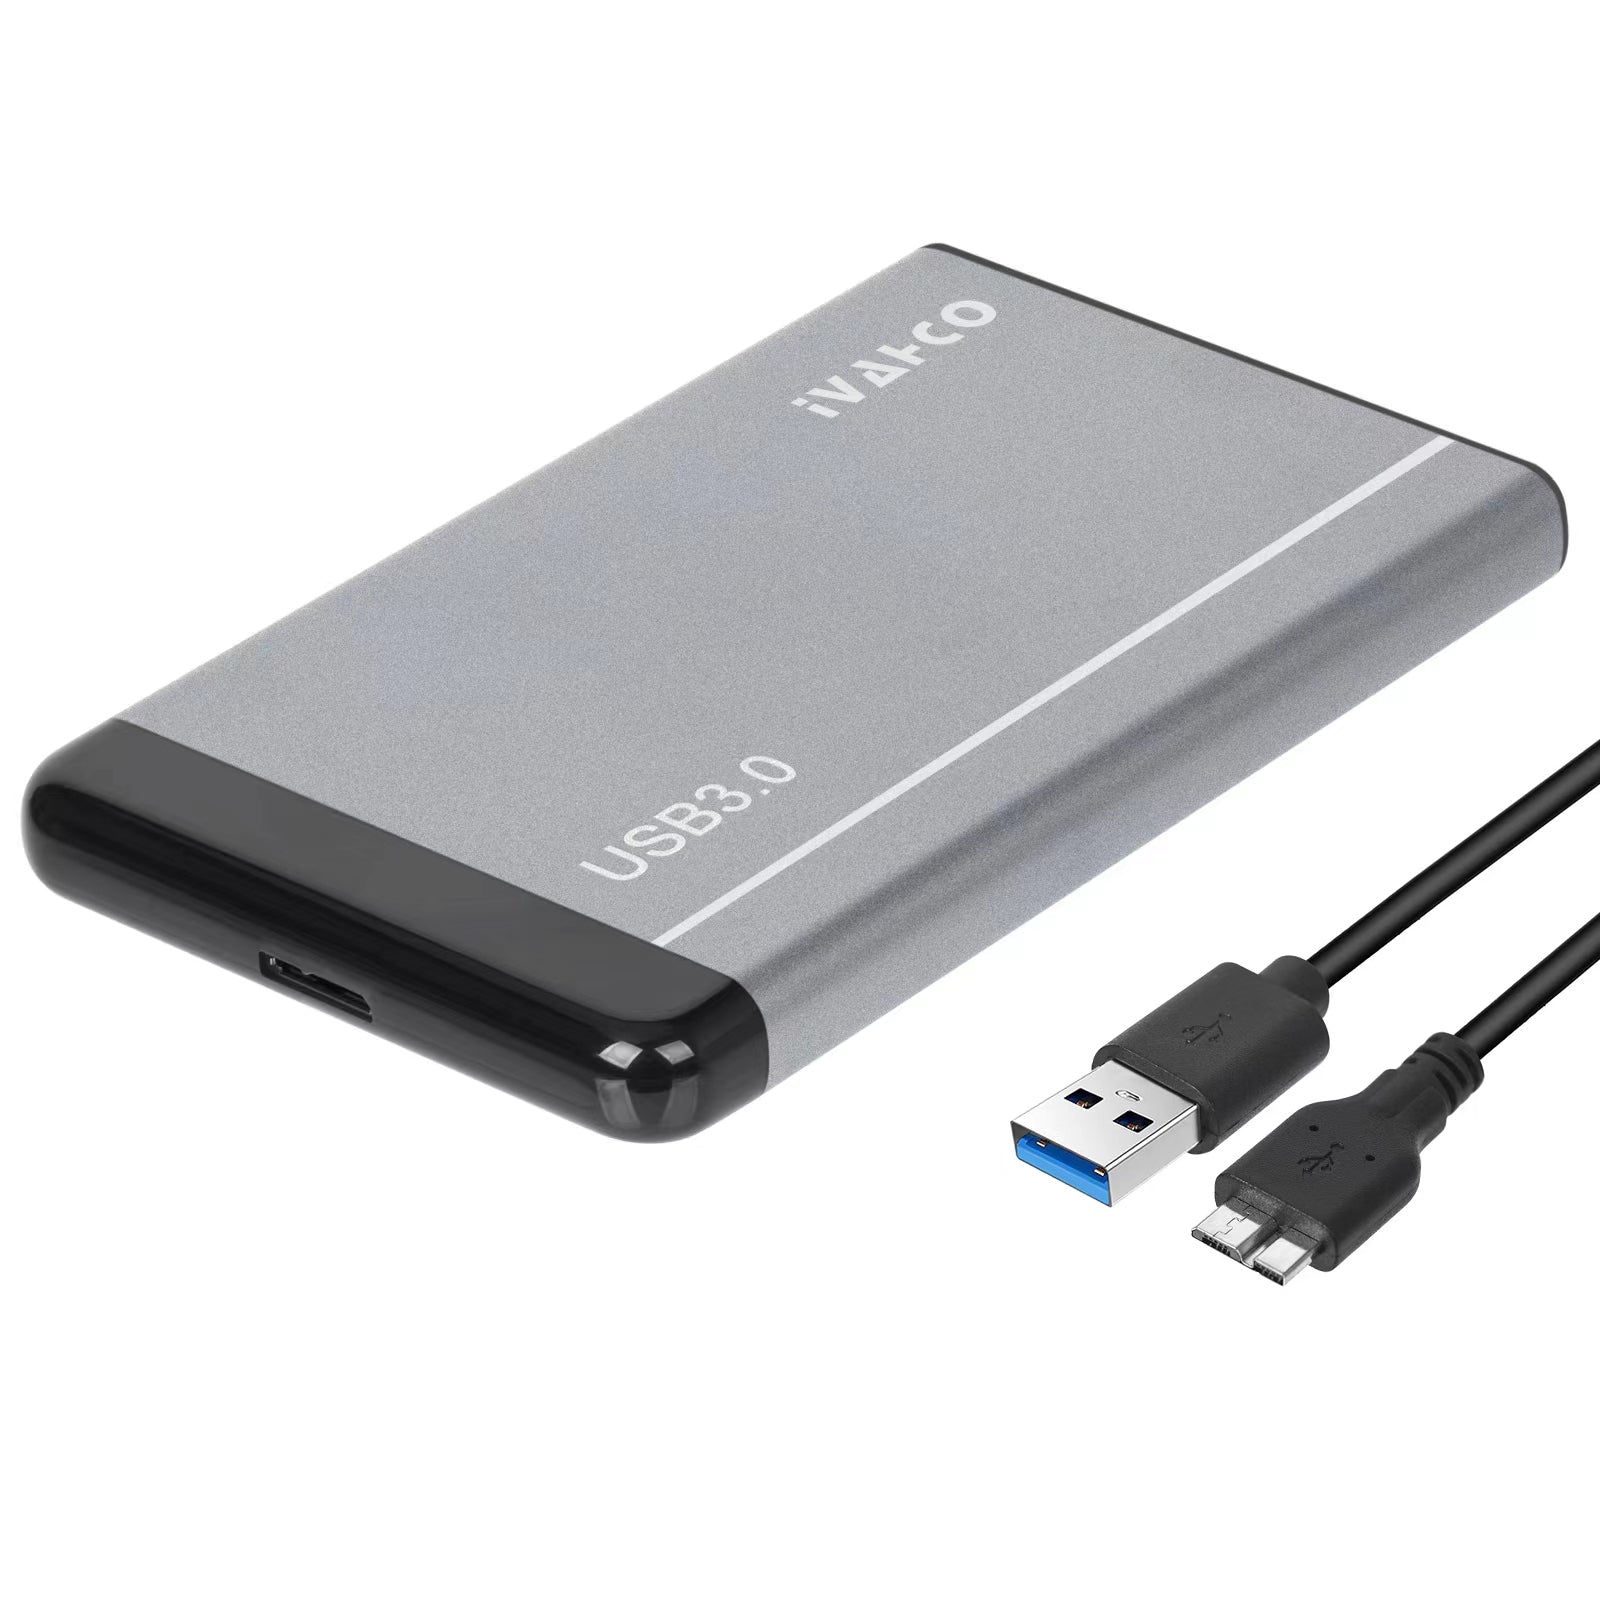 IVAHCO 320GB 2.5" HDD External Case Plug and Play USB3.Matte 0 Hard Disk Enclosure with Data Cable - Grey